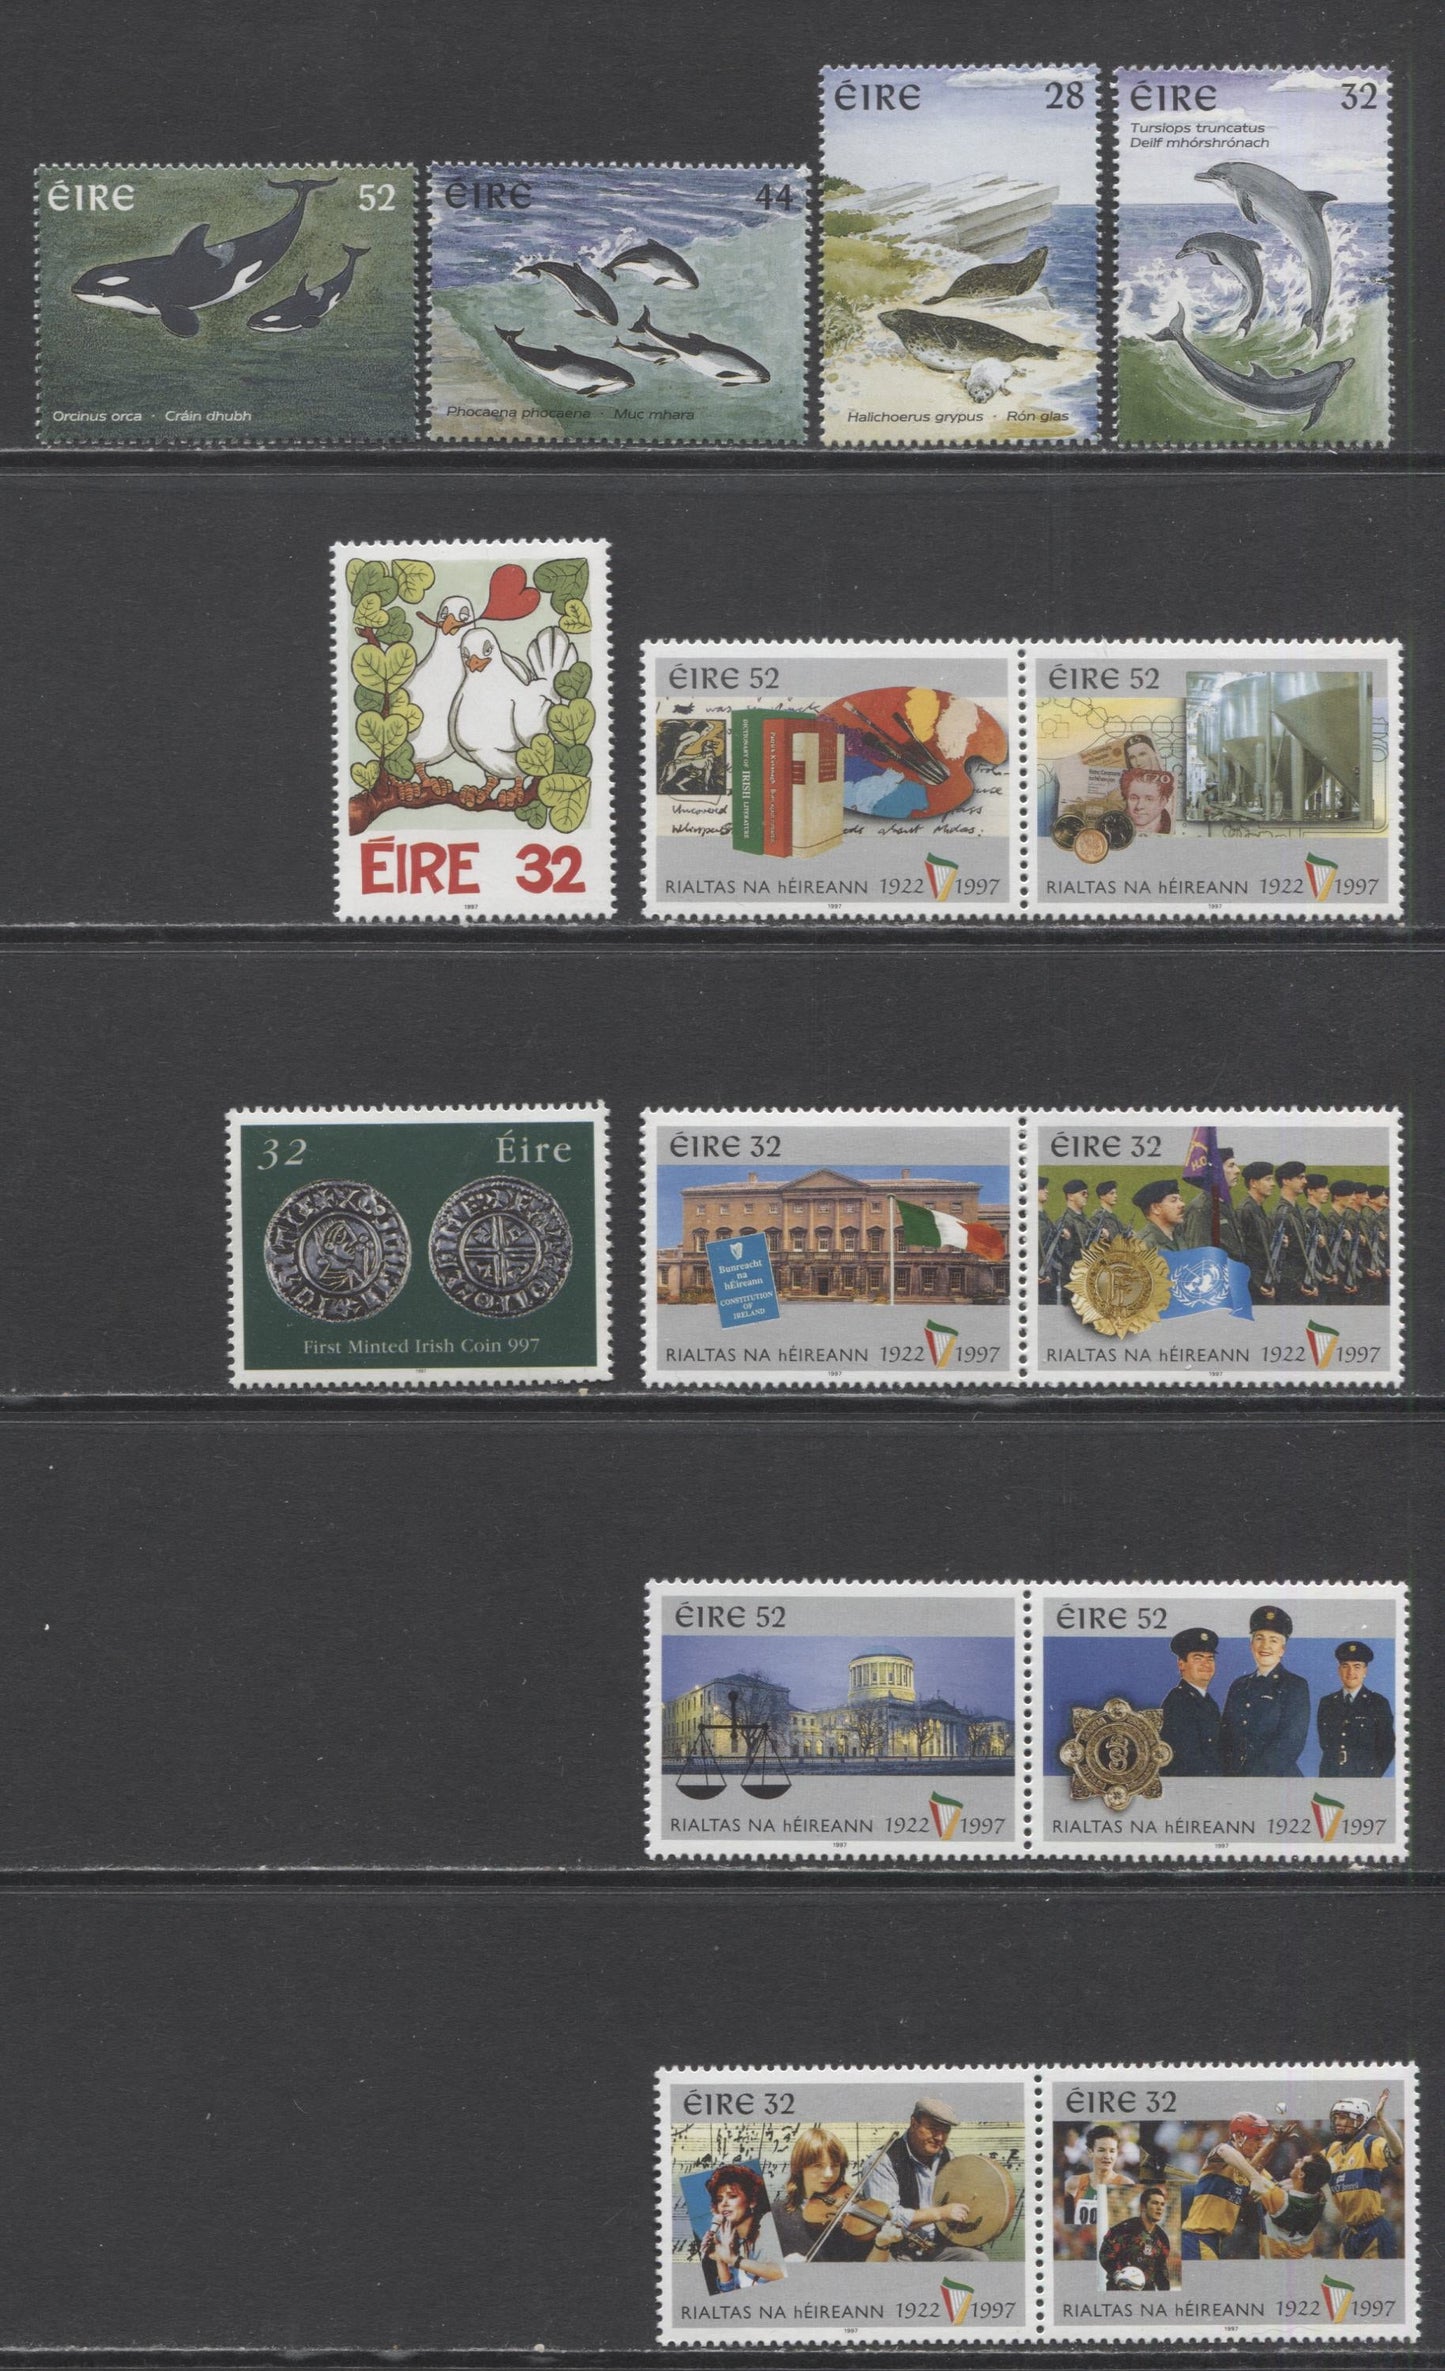 Lot 148 Ireland SC#1010/1059 1997 Commemoratives, A VFNH Range Of Singles, 2017 Scott Cat. $20.7 USD, Click on Listing to See ALL Pictures